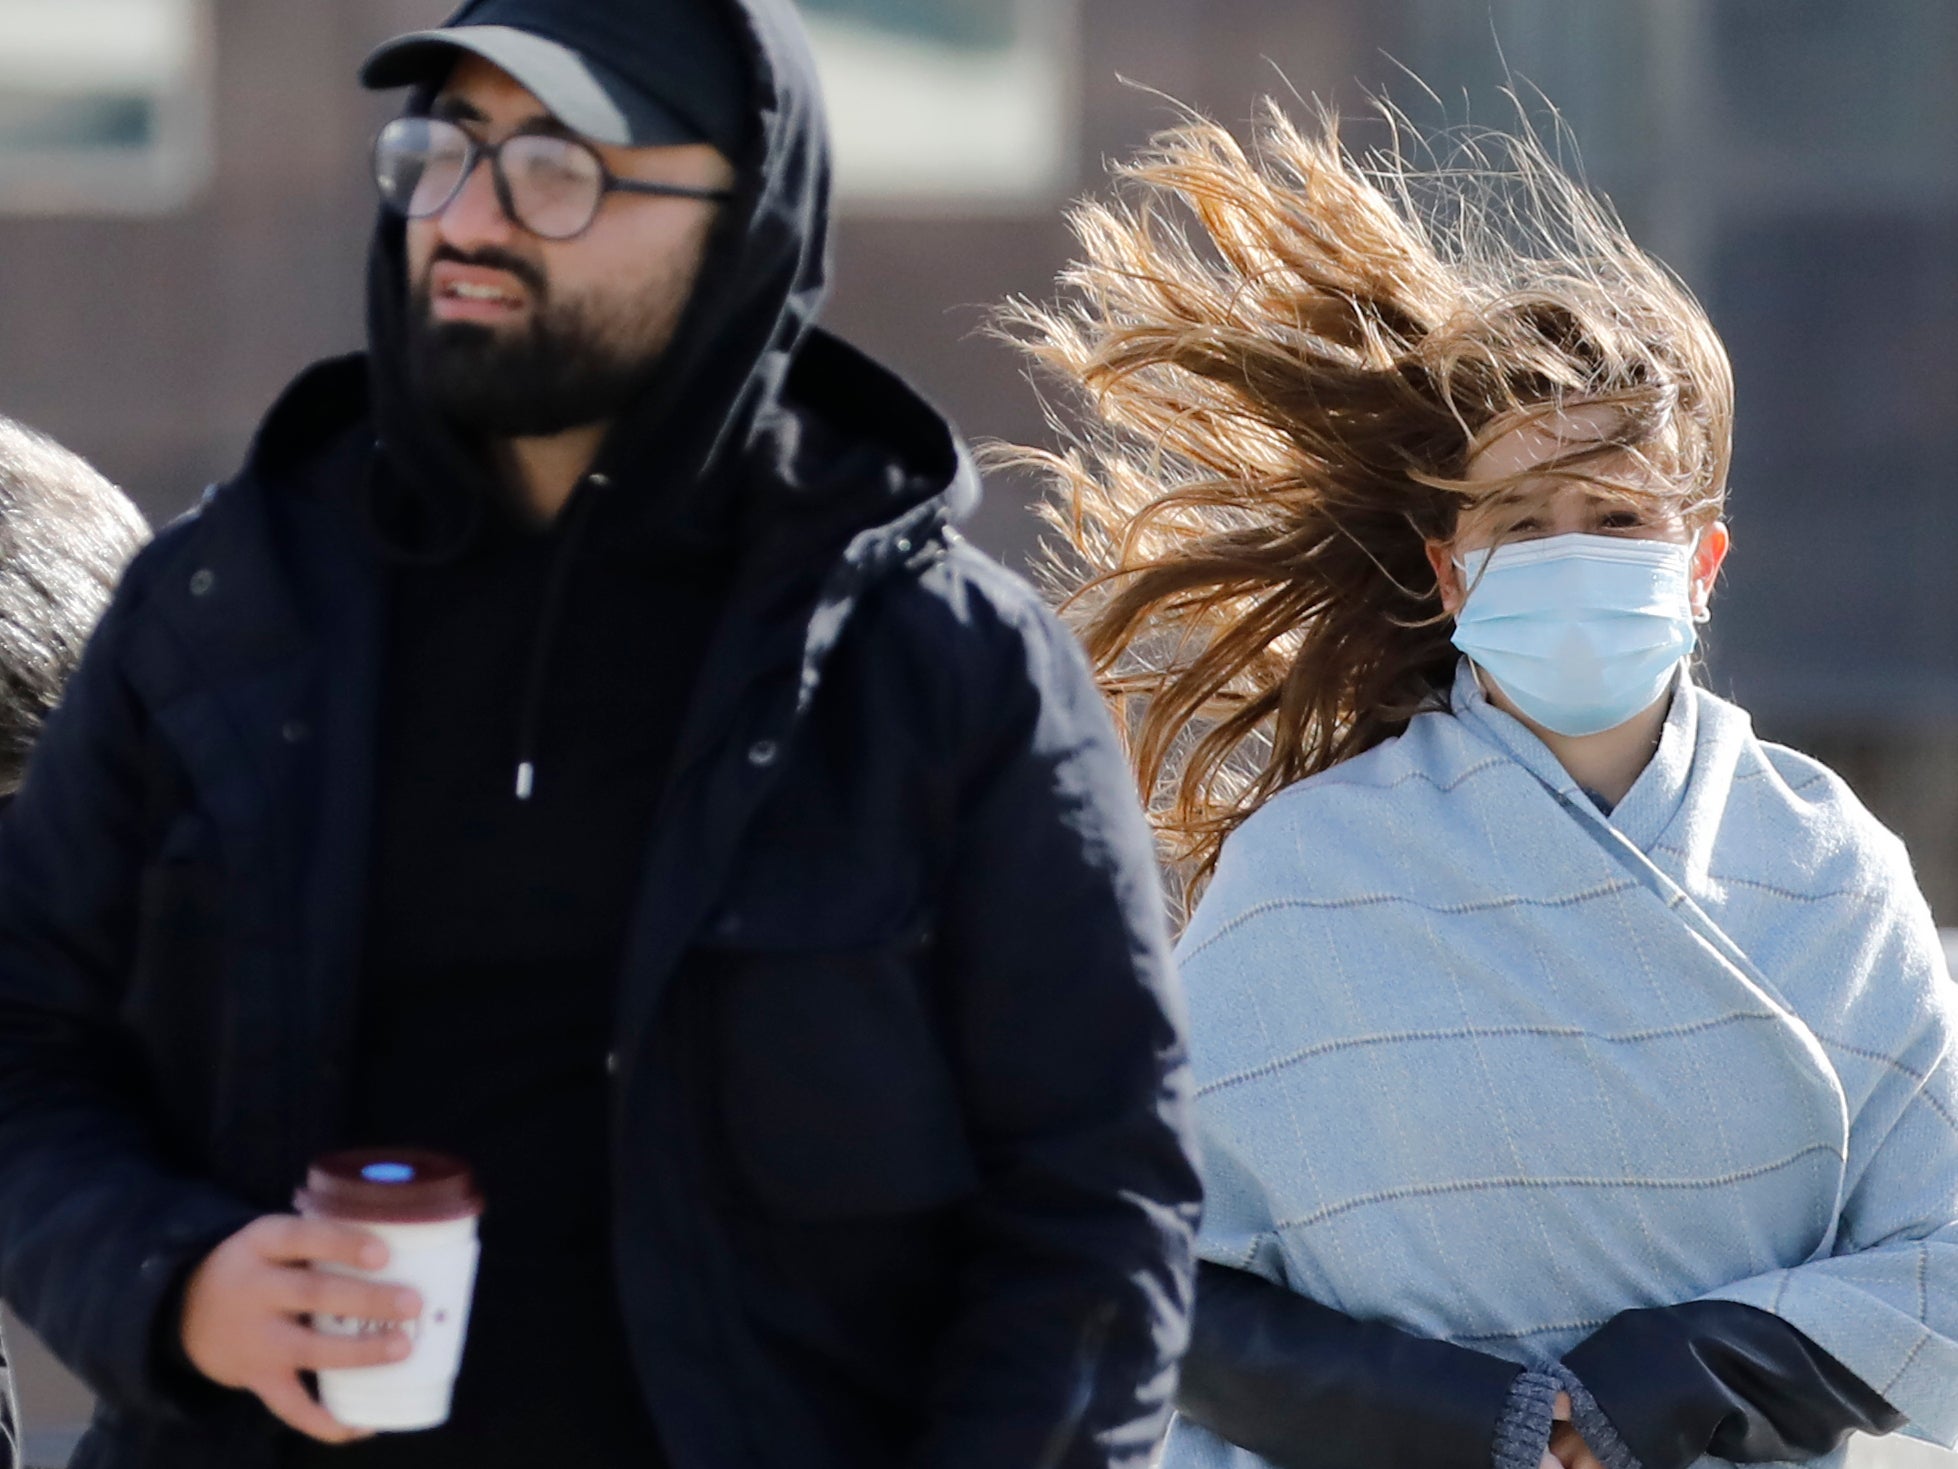 Pedestrians face windy conditions as they cross London Bridge in central London over the weekend